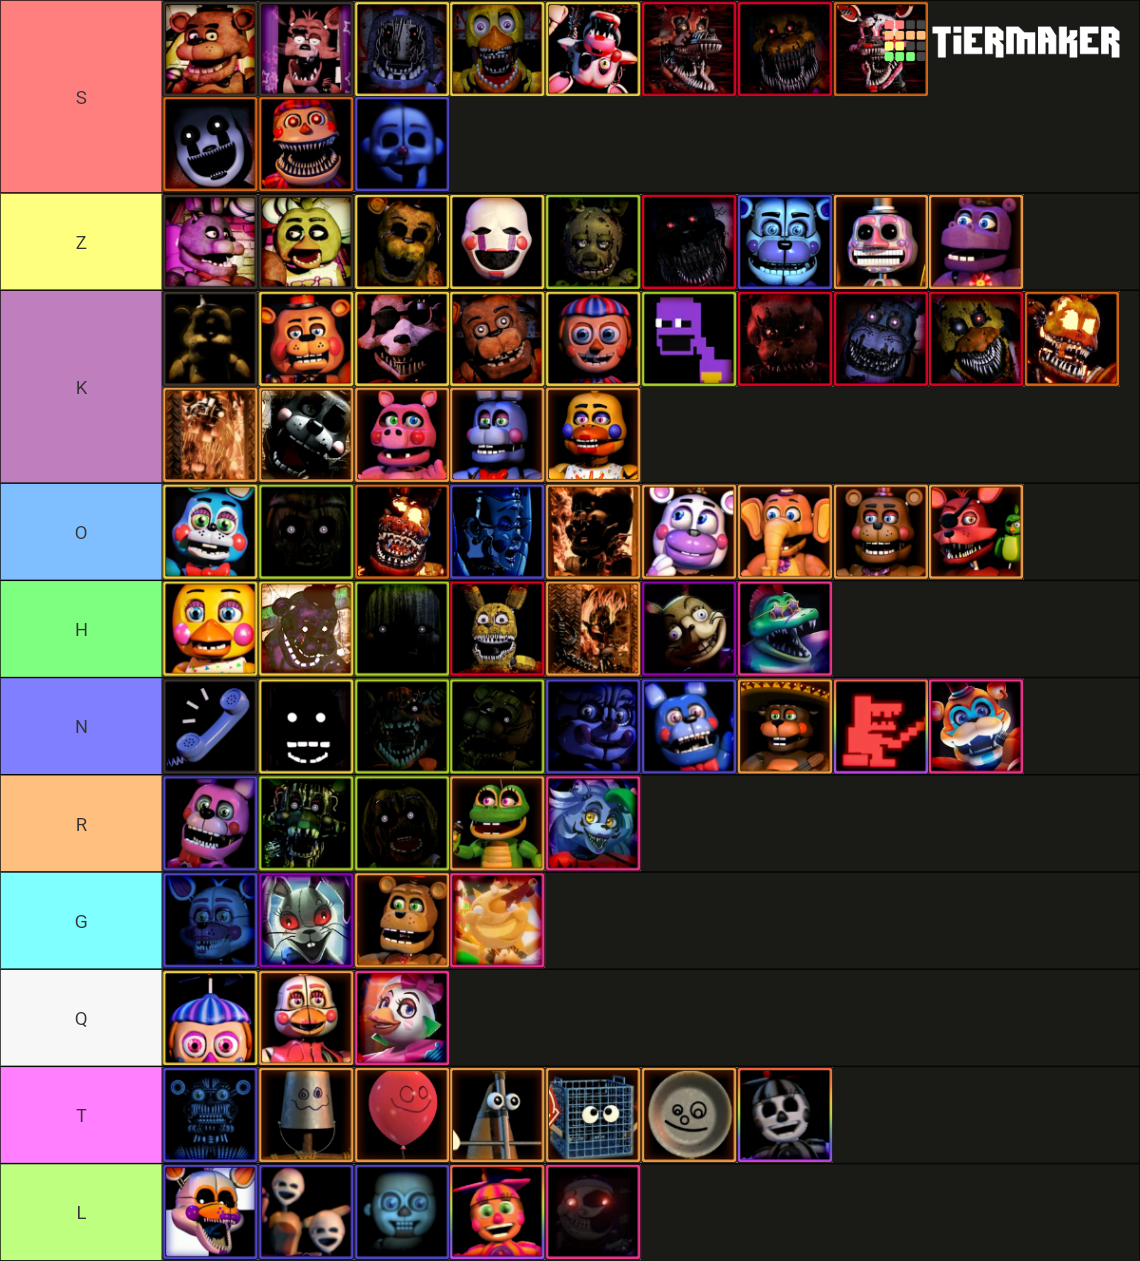 My Opinions of All Fnaf Characters Tier List by Larimar2000 on